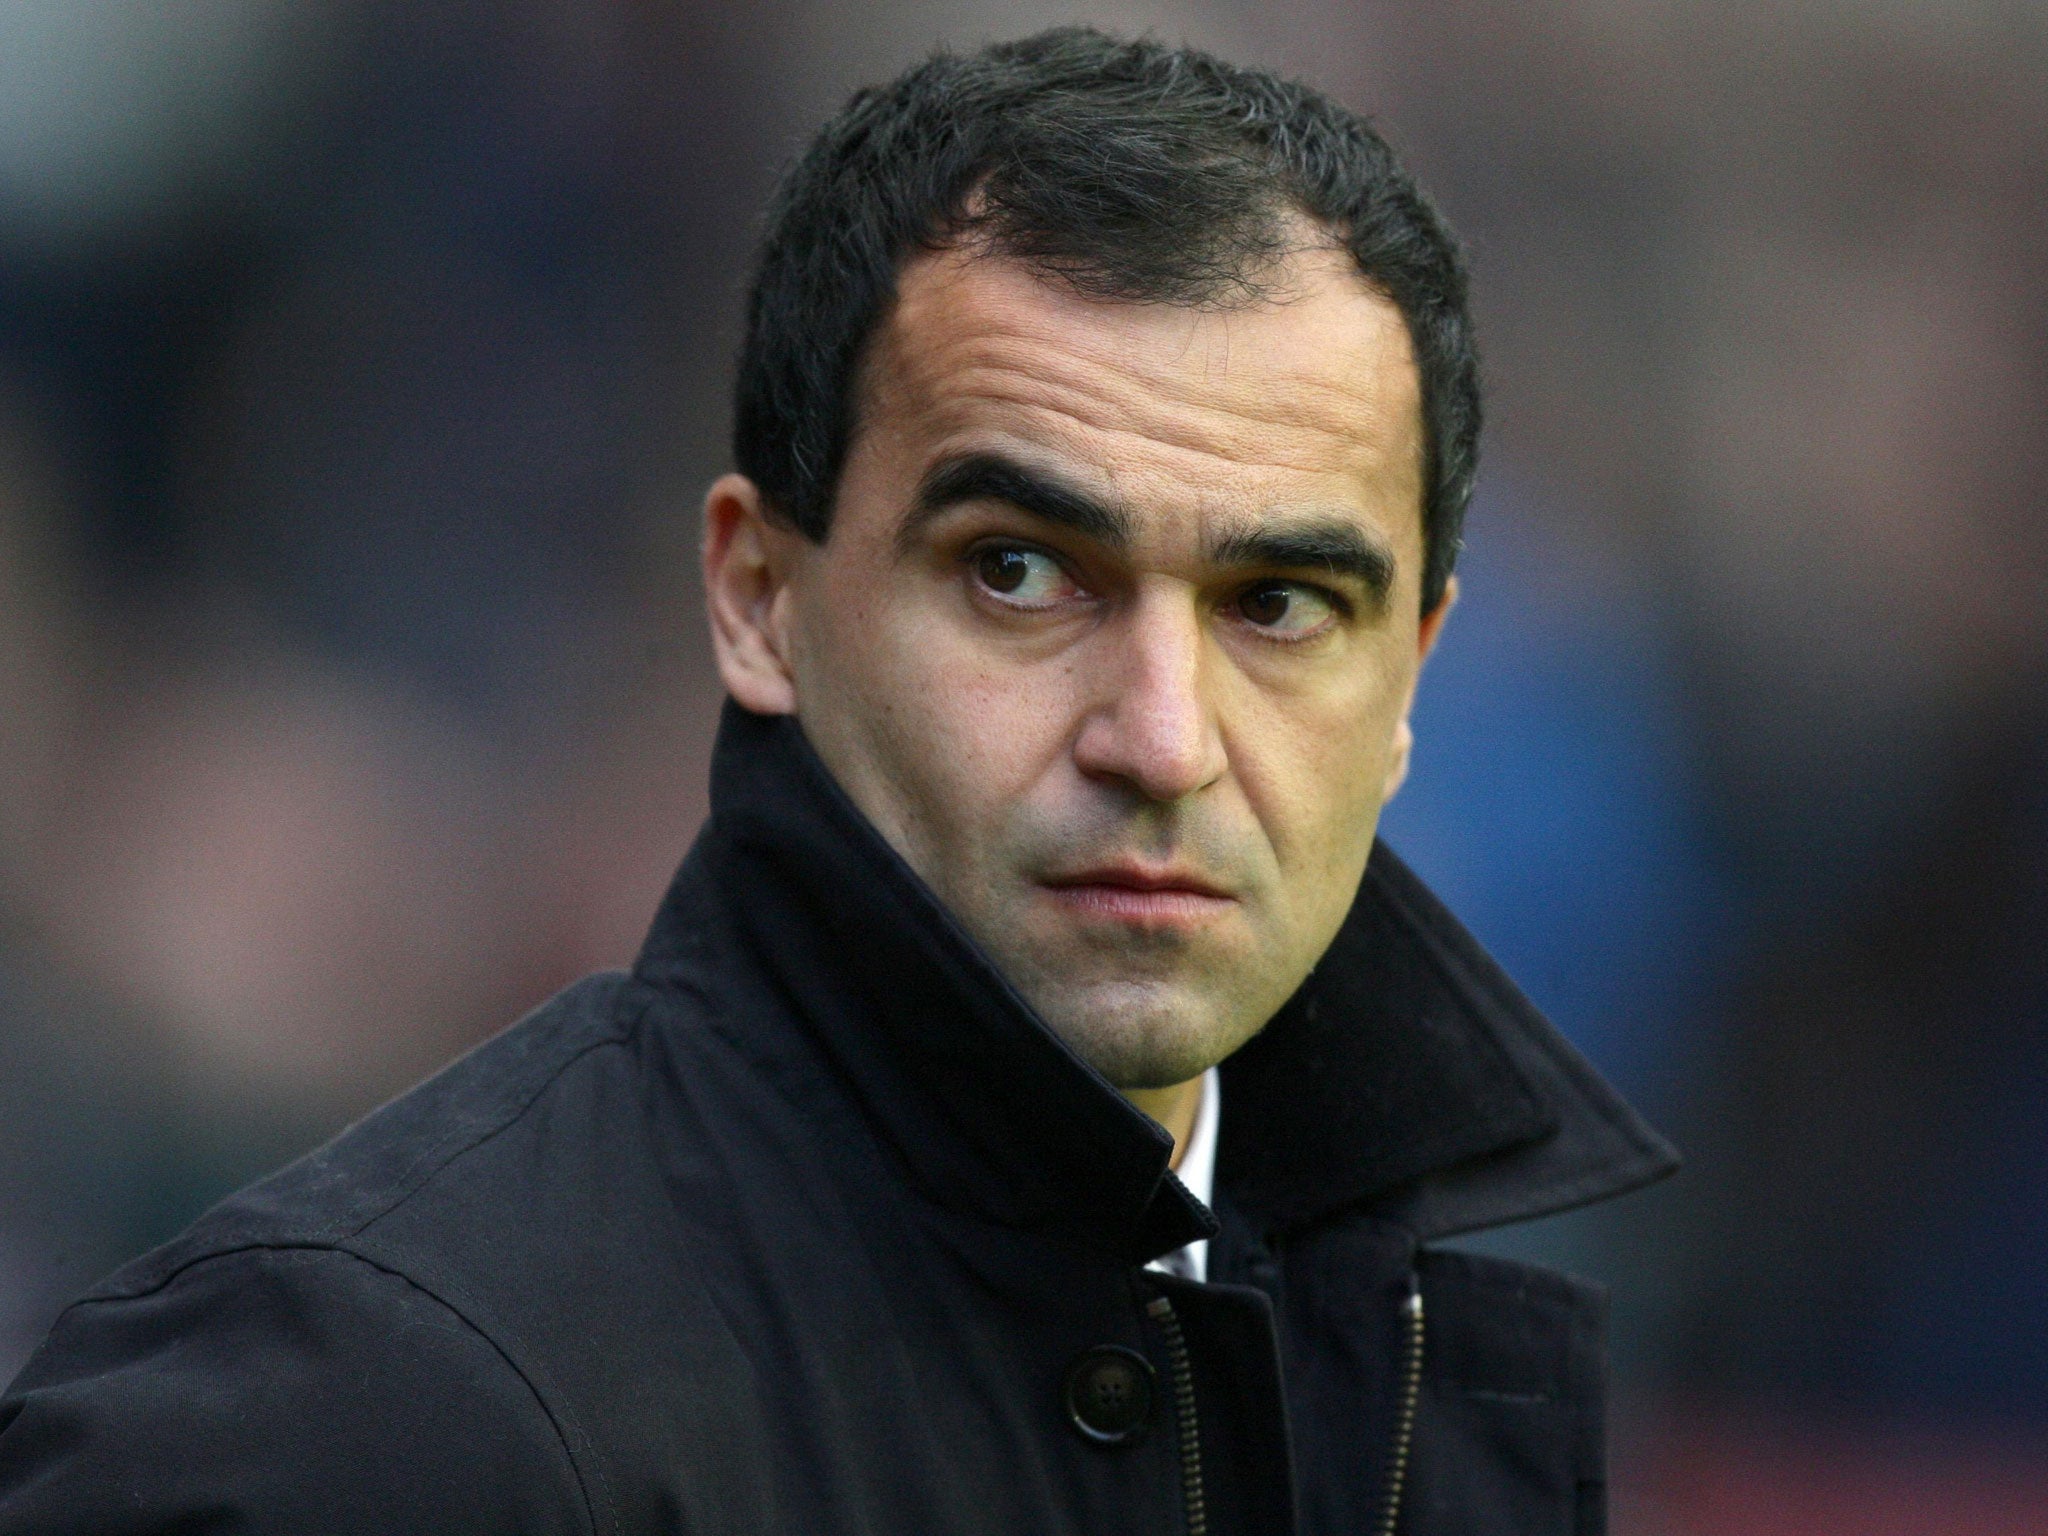 Everton have reached an agreement with Wigan Athletic over compensation for their manager Roberto Martinez